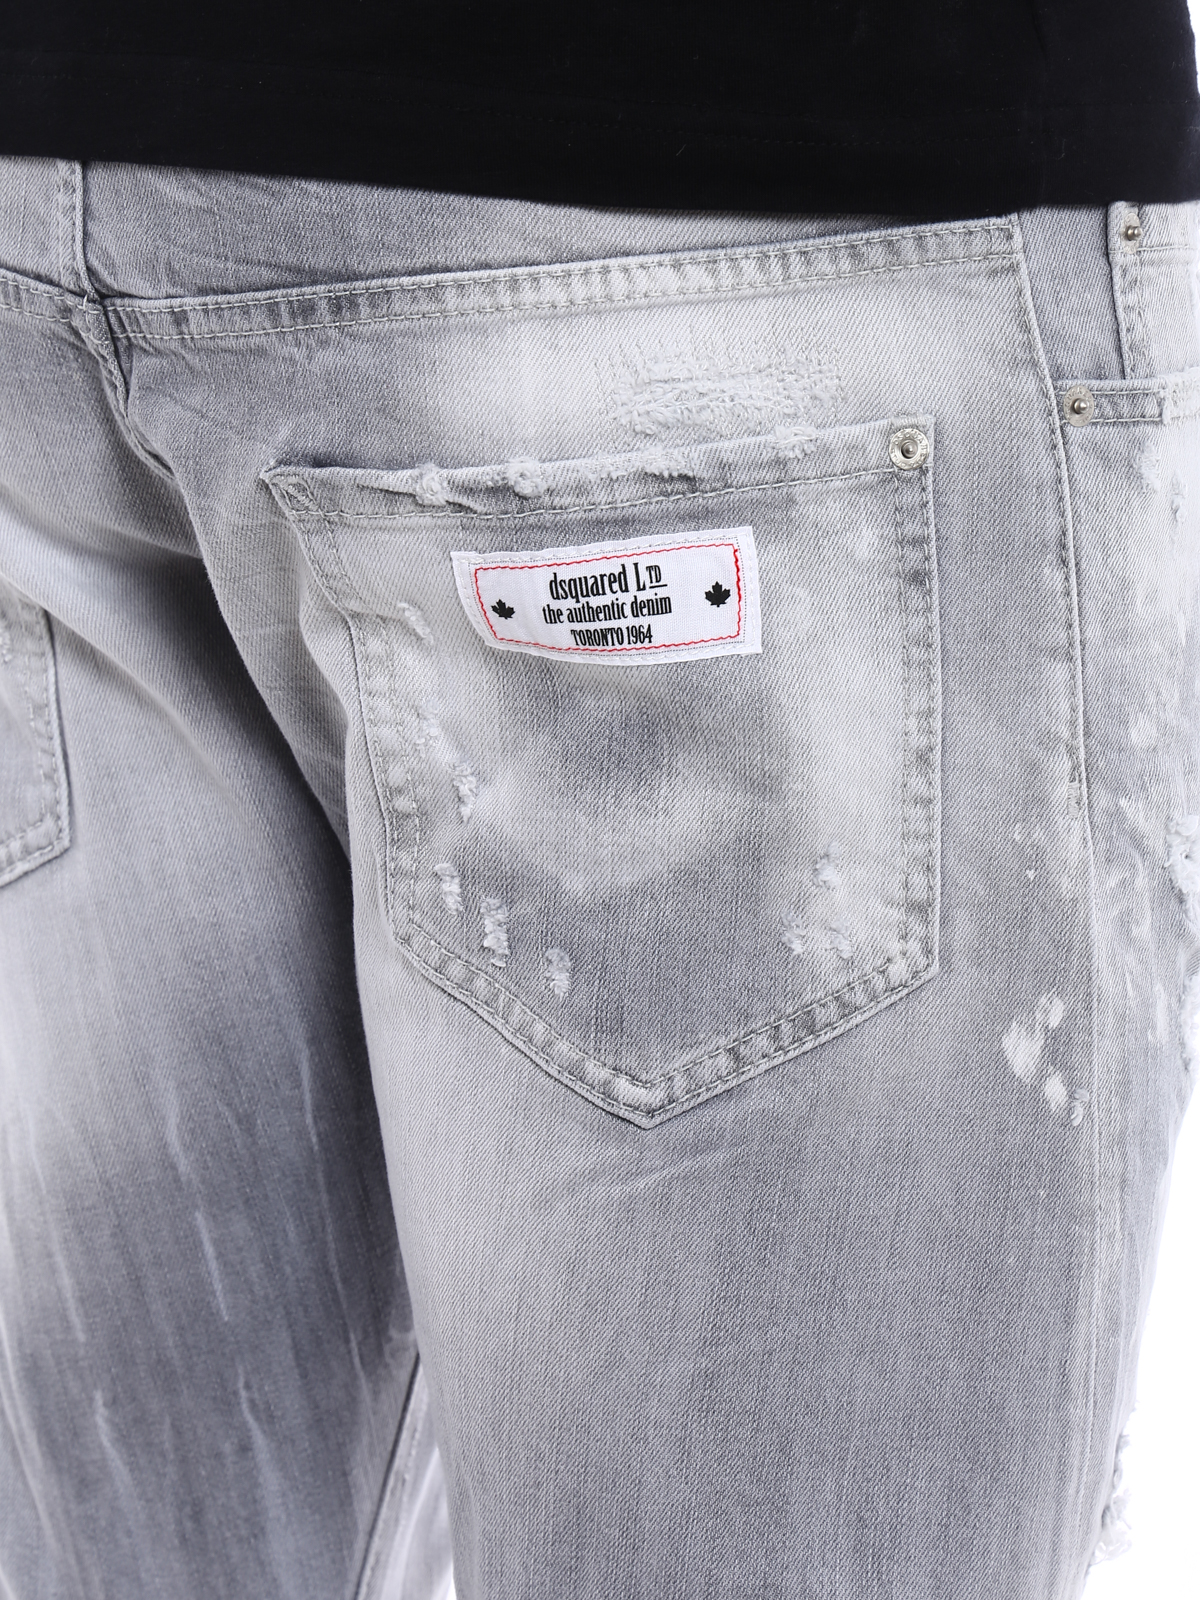 buy dsquared jeans online